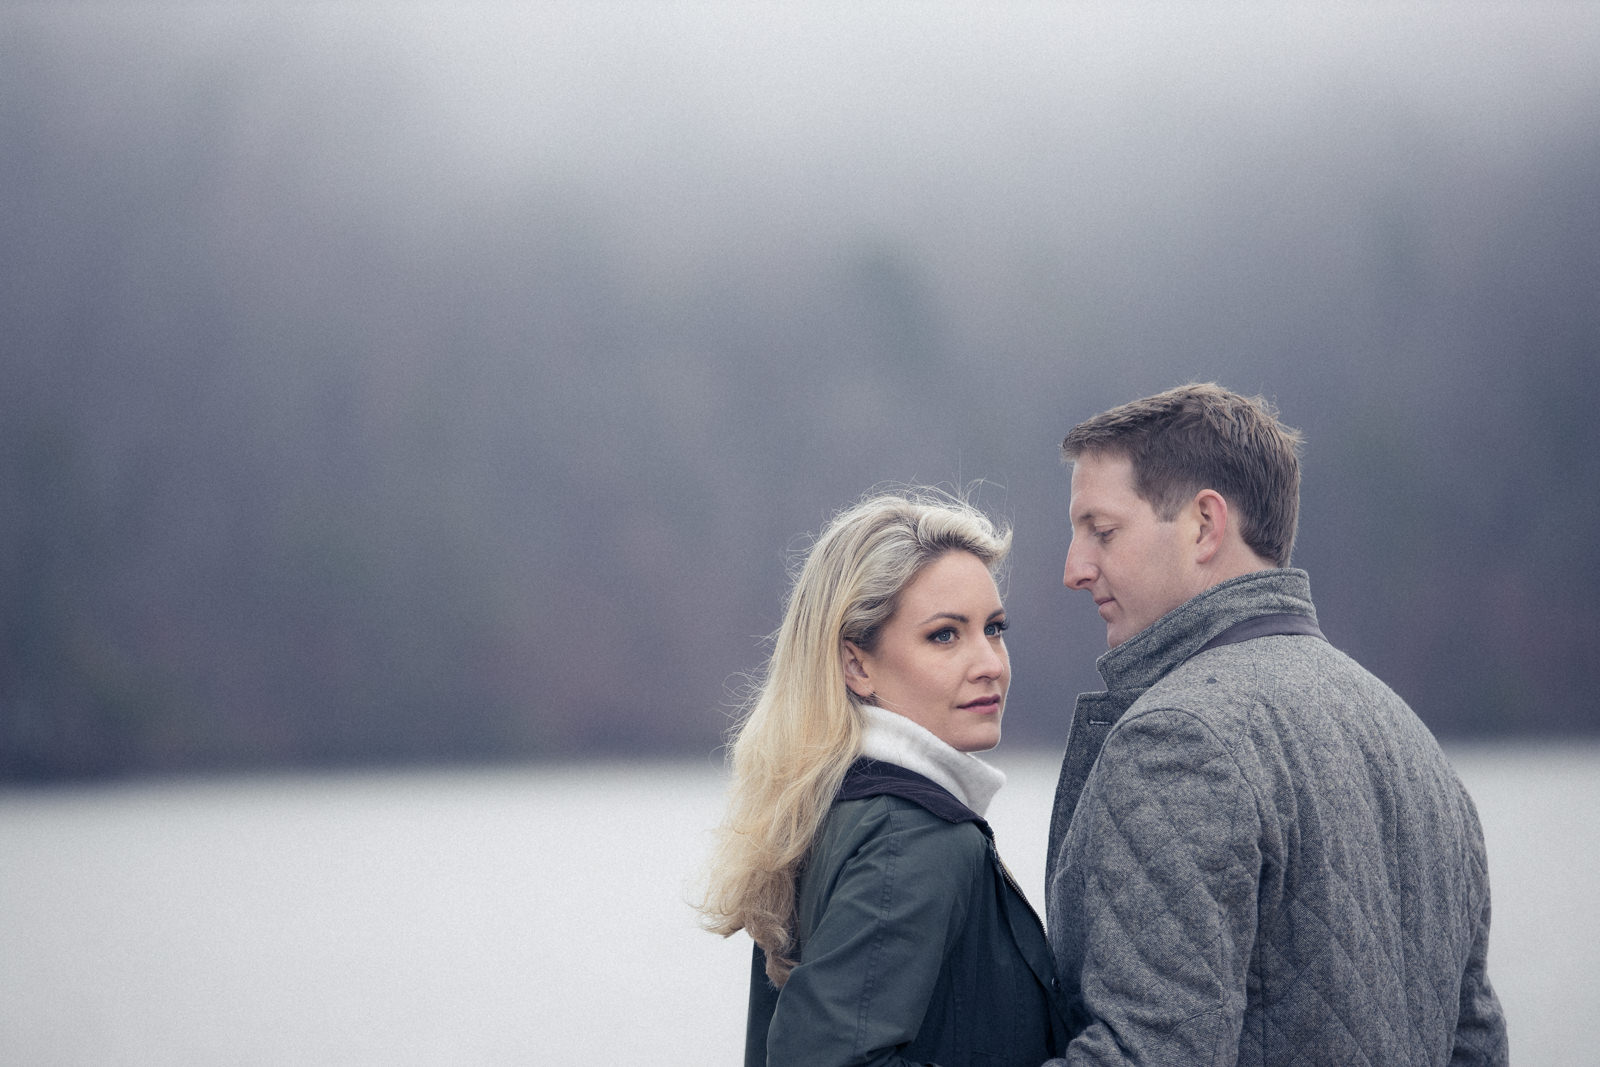 Engagement portraits in Atlanta Georgia near the lake close up with fog rolling in